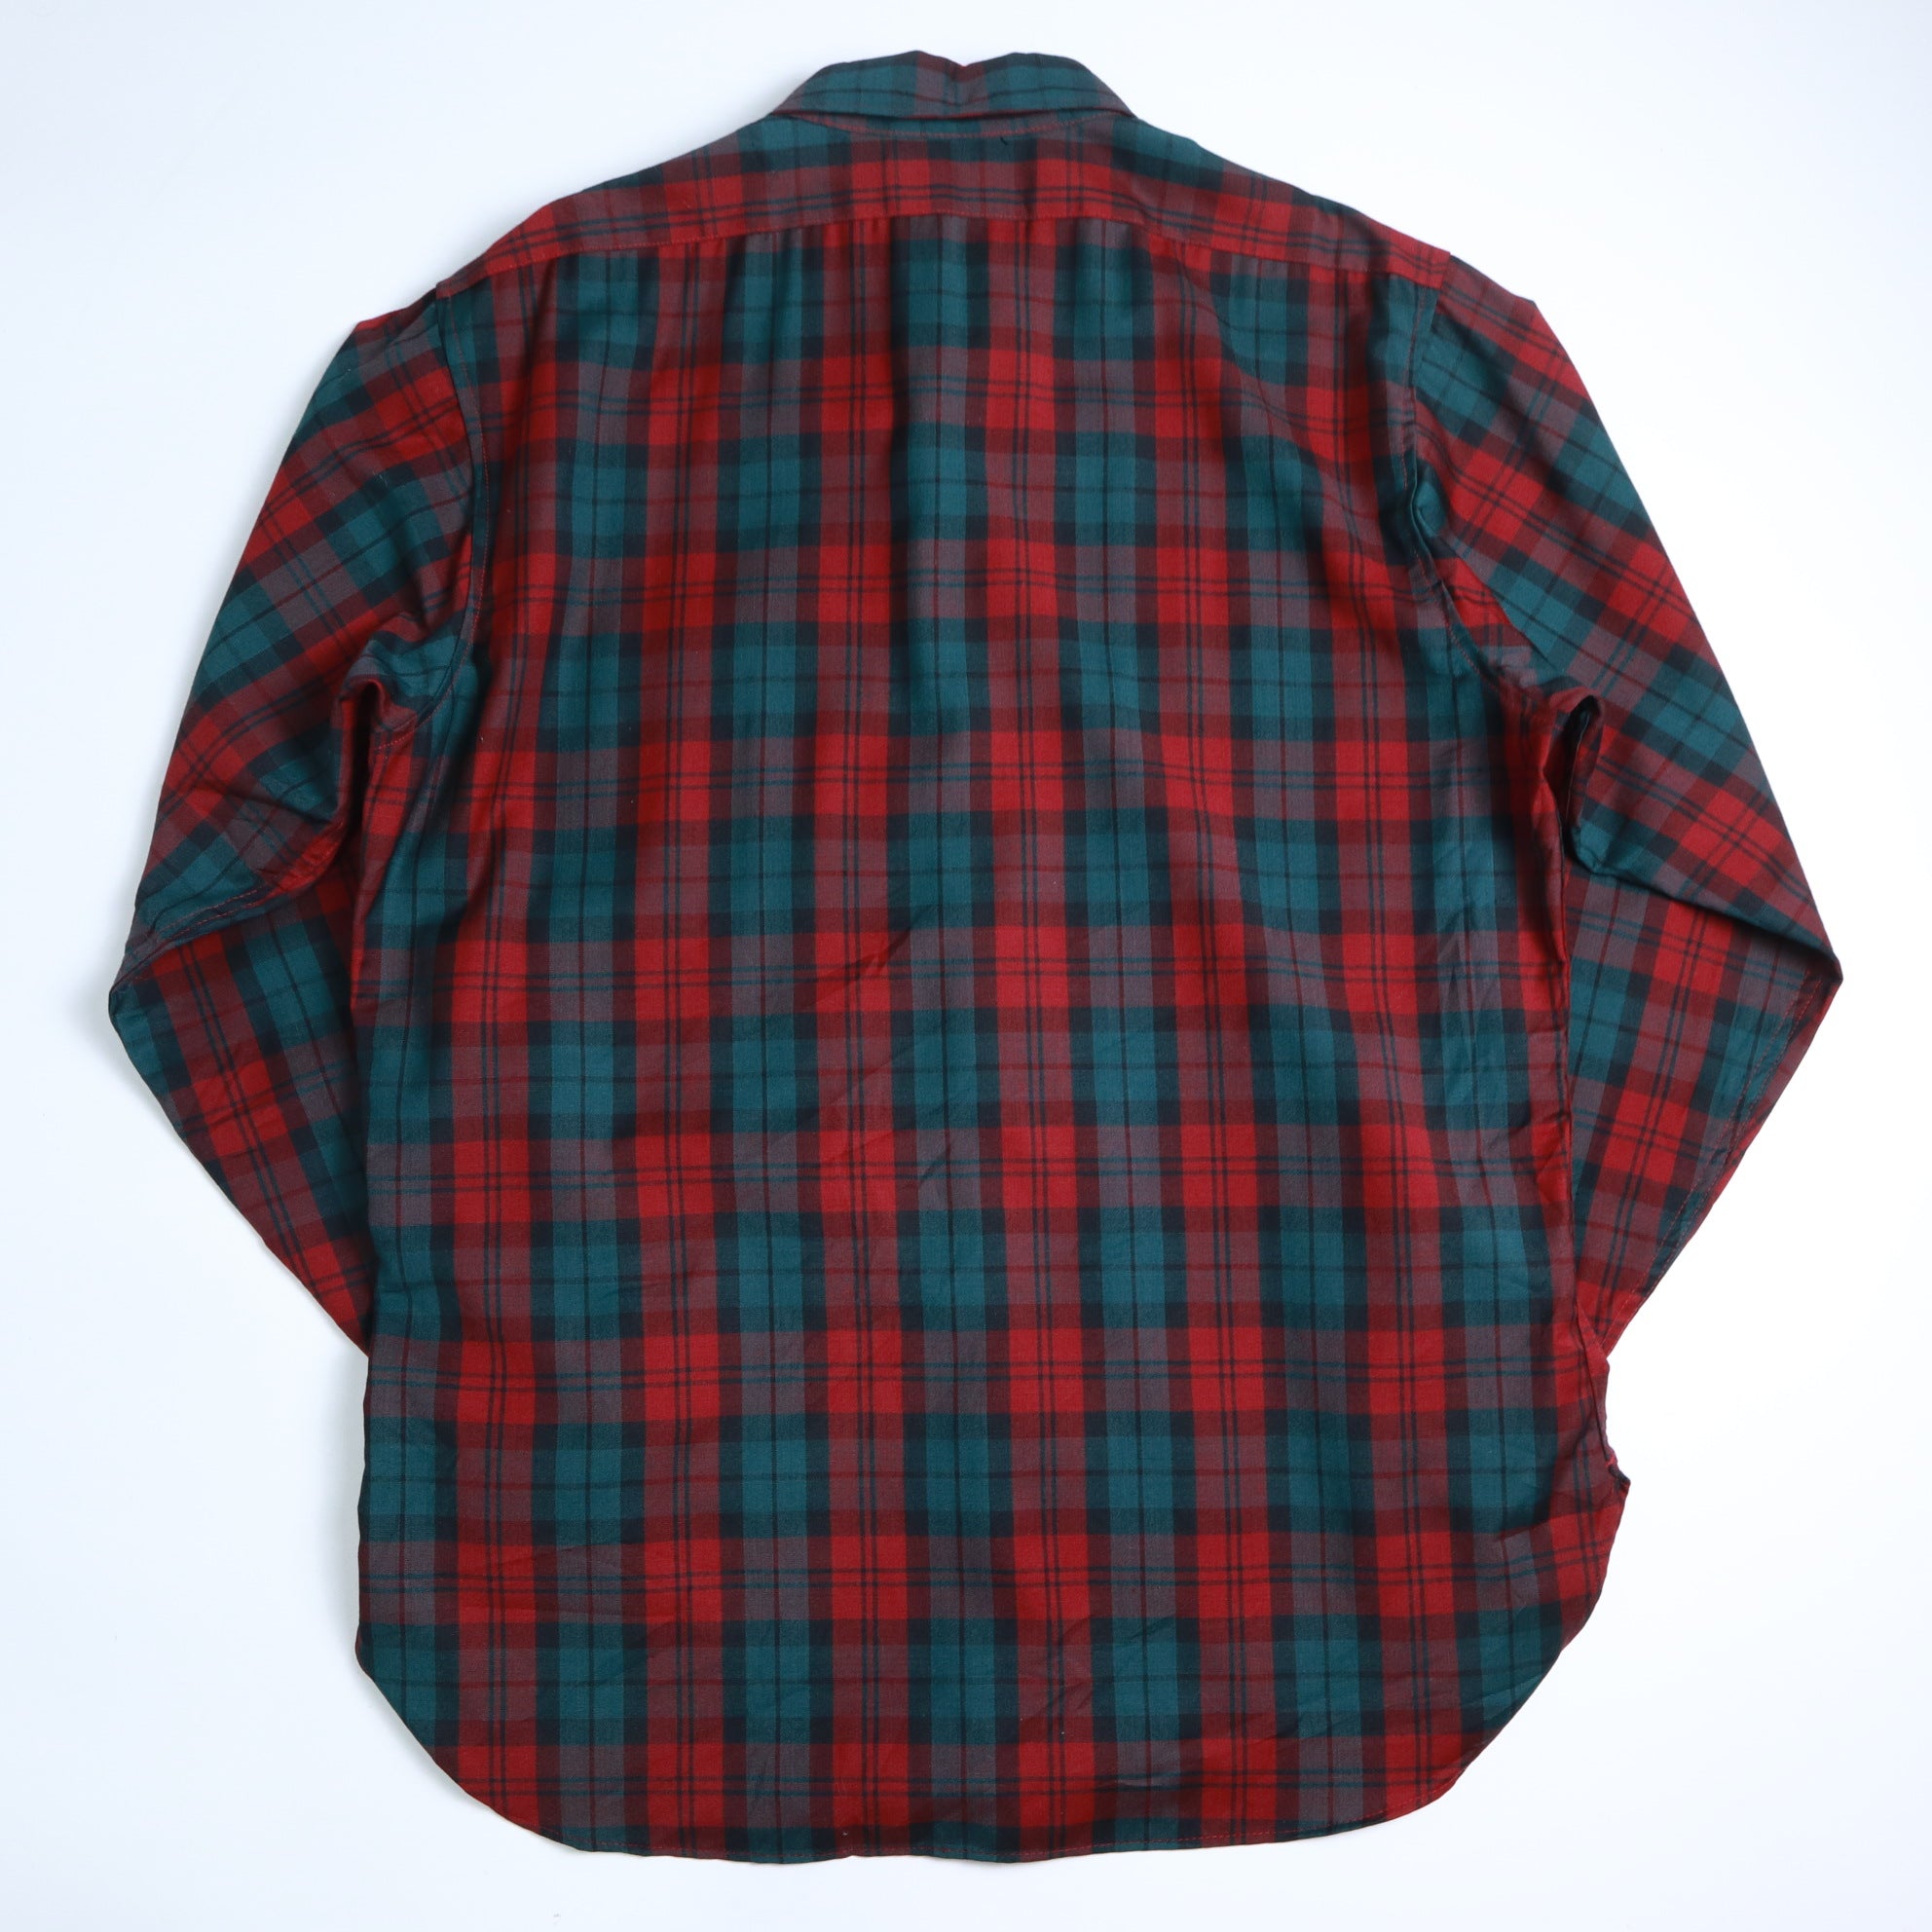 1970s American Made Pendleton Red and Green Check Wool Shirt 